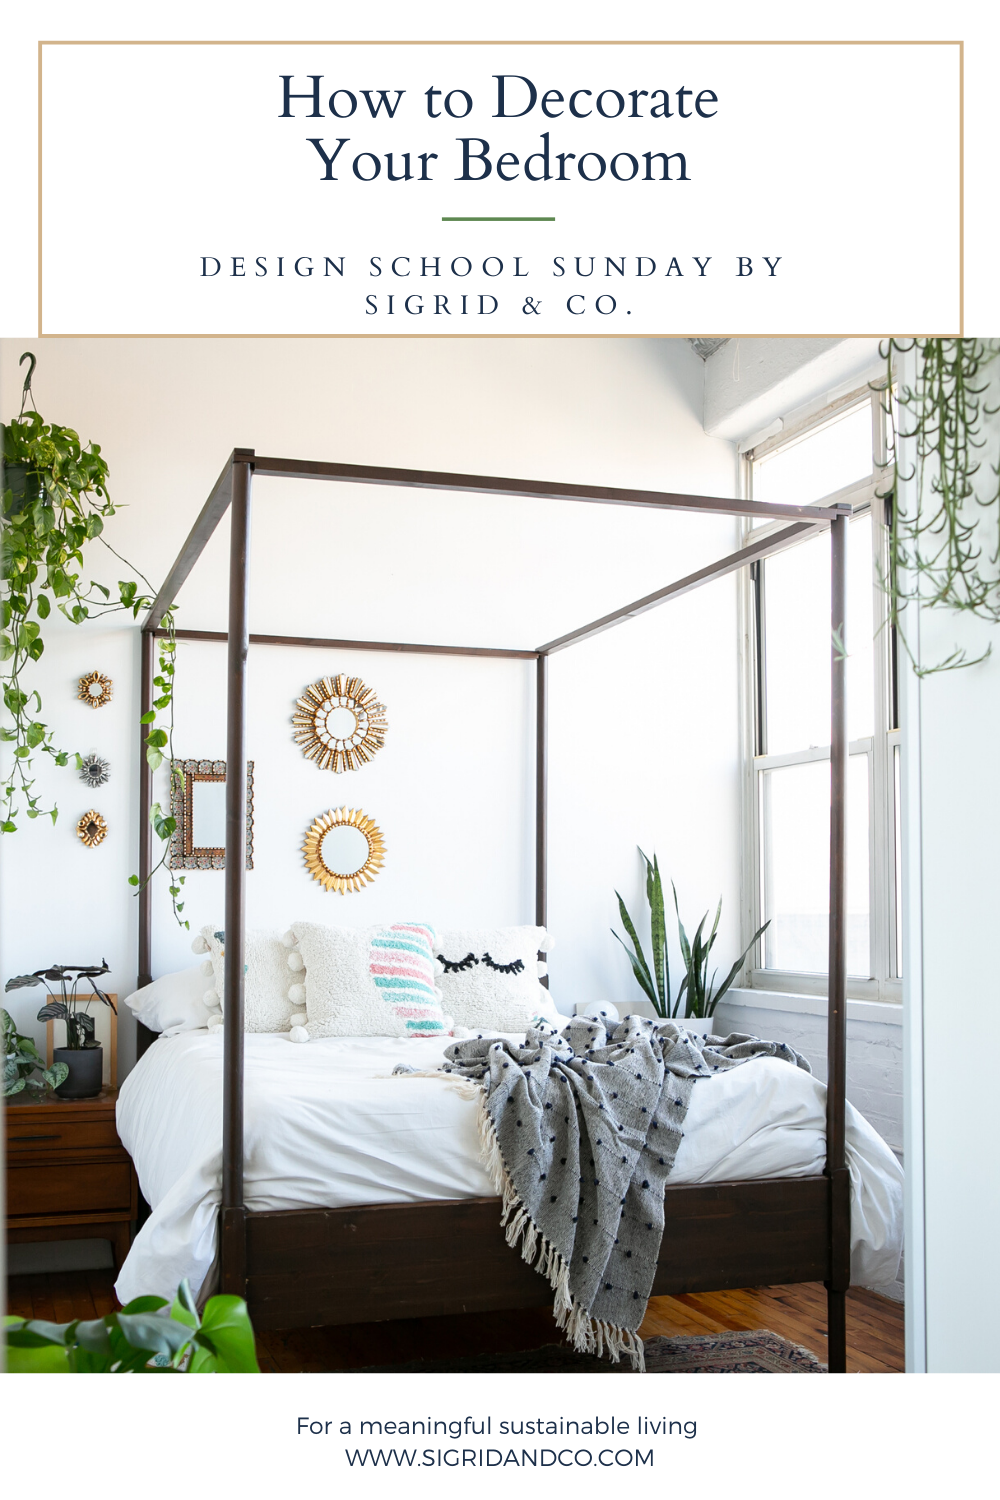 How to Decorate Your Bedroom - Sigrid & Co.